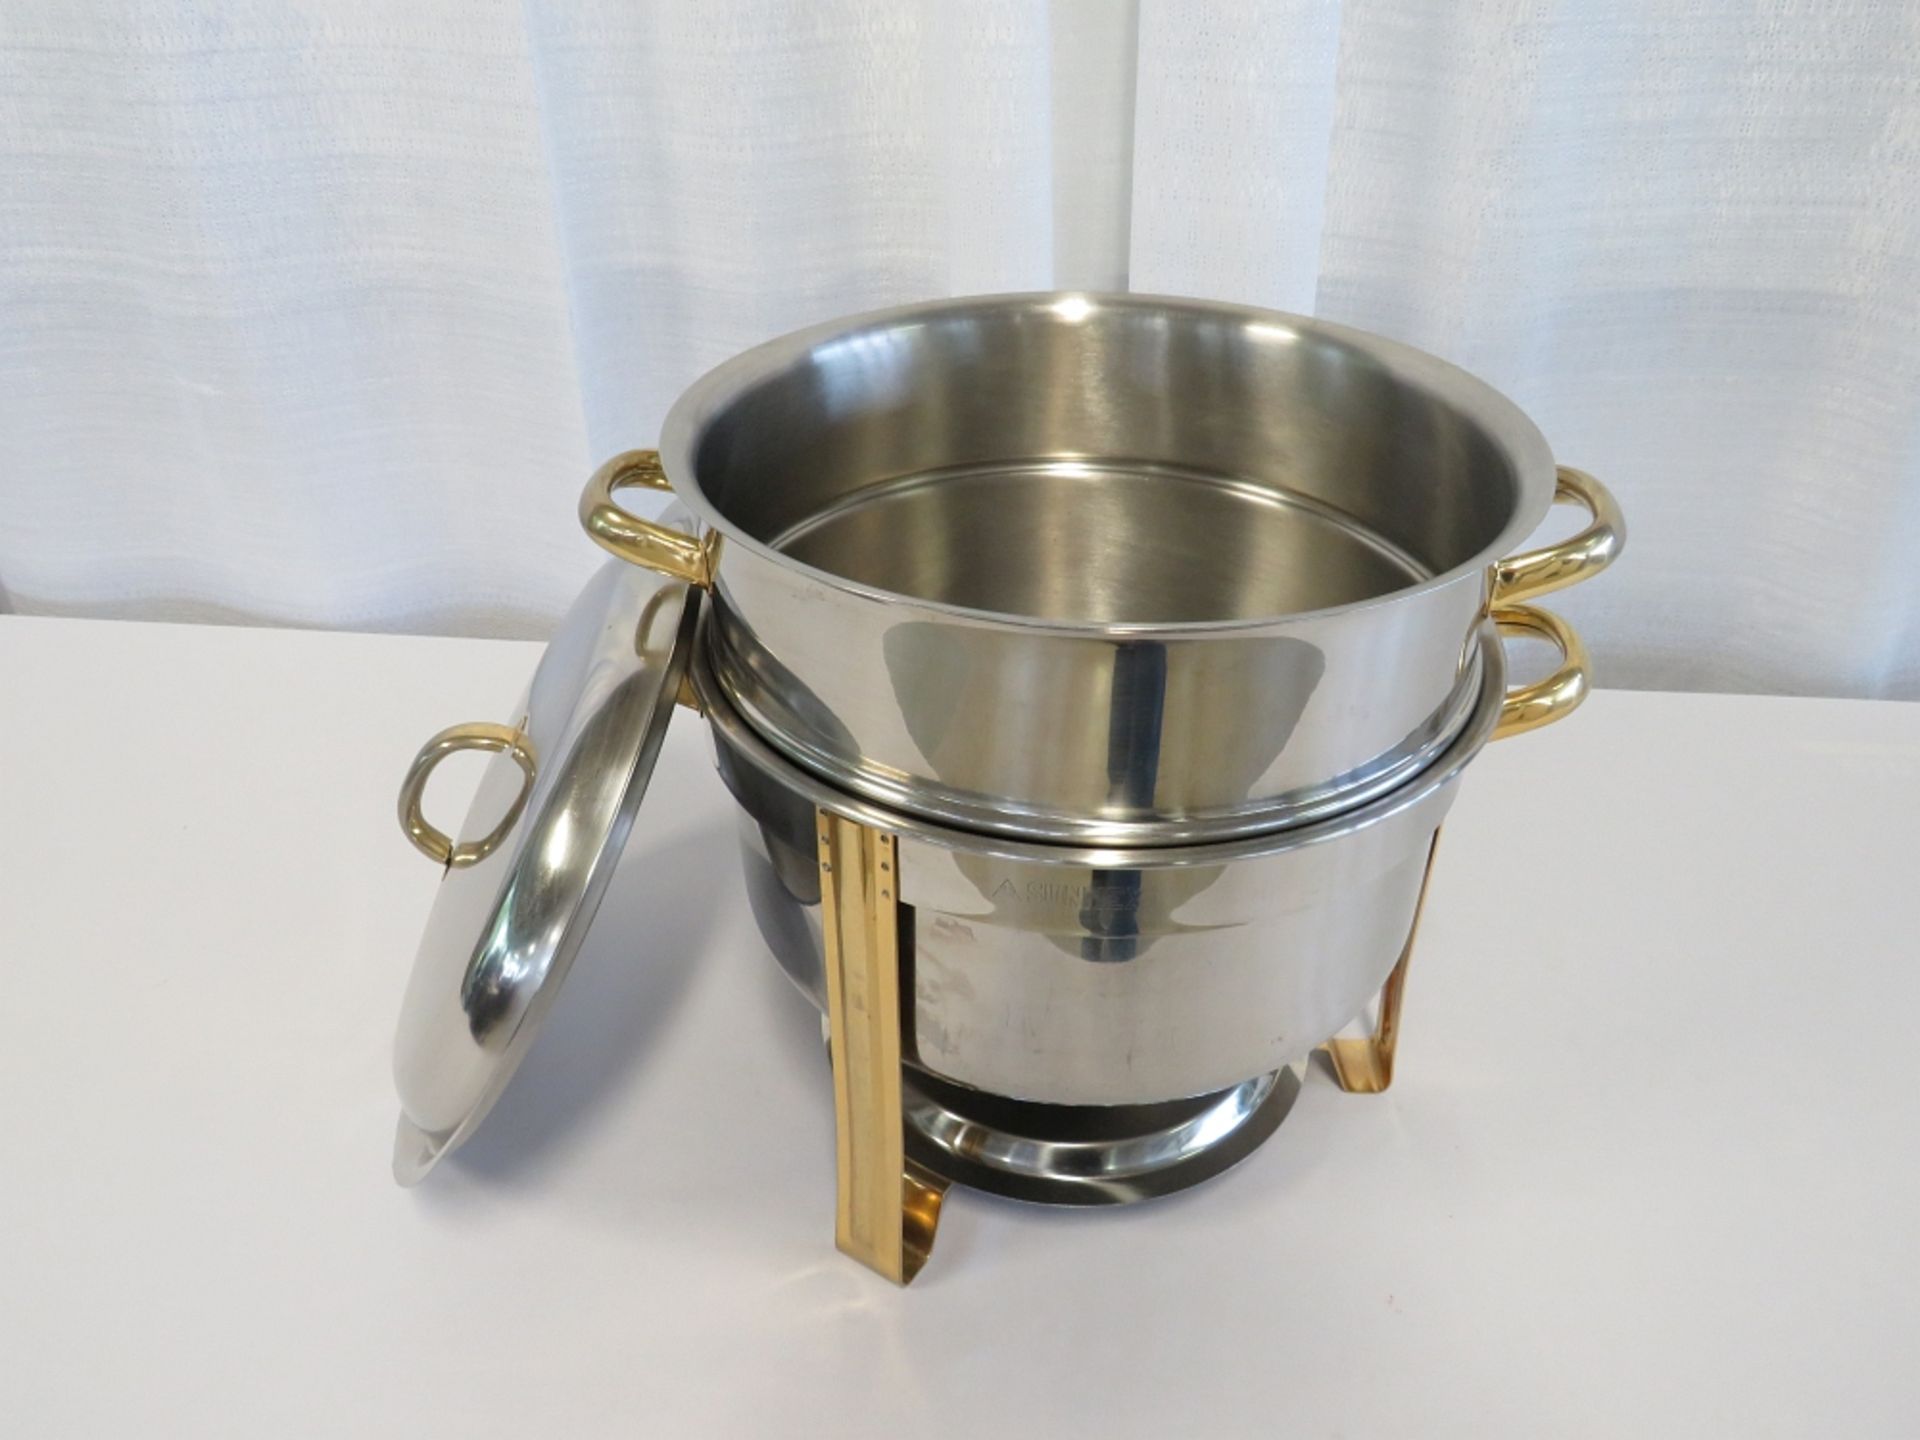 15 Qt. Soup Tureen Chafer - Image 2 of 2